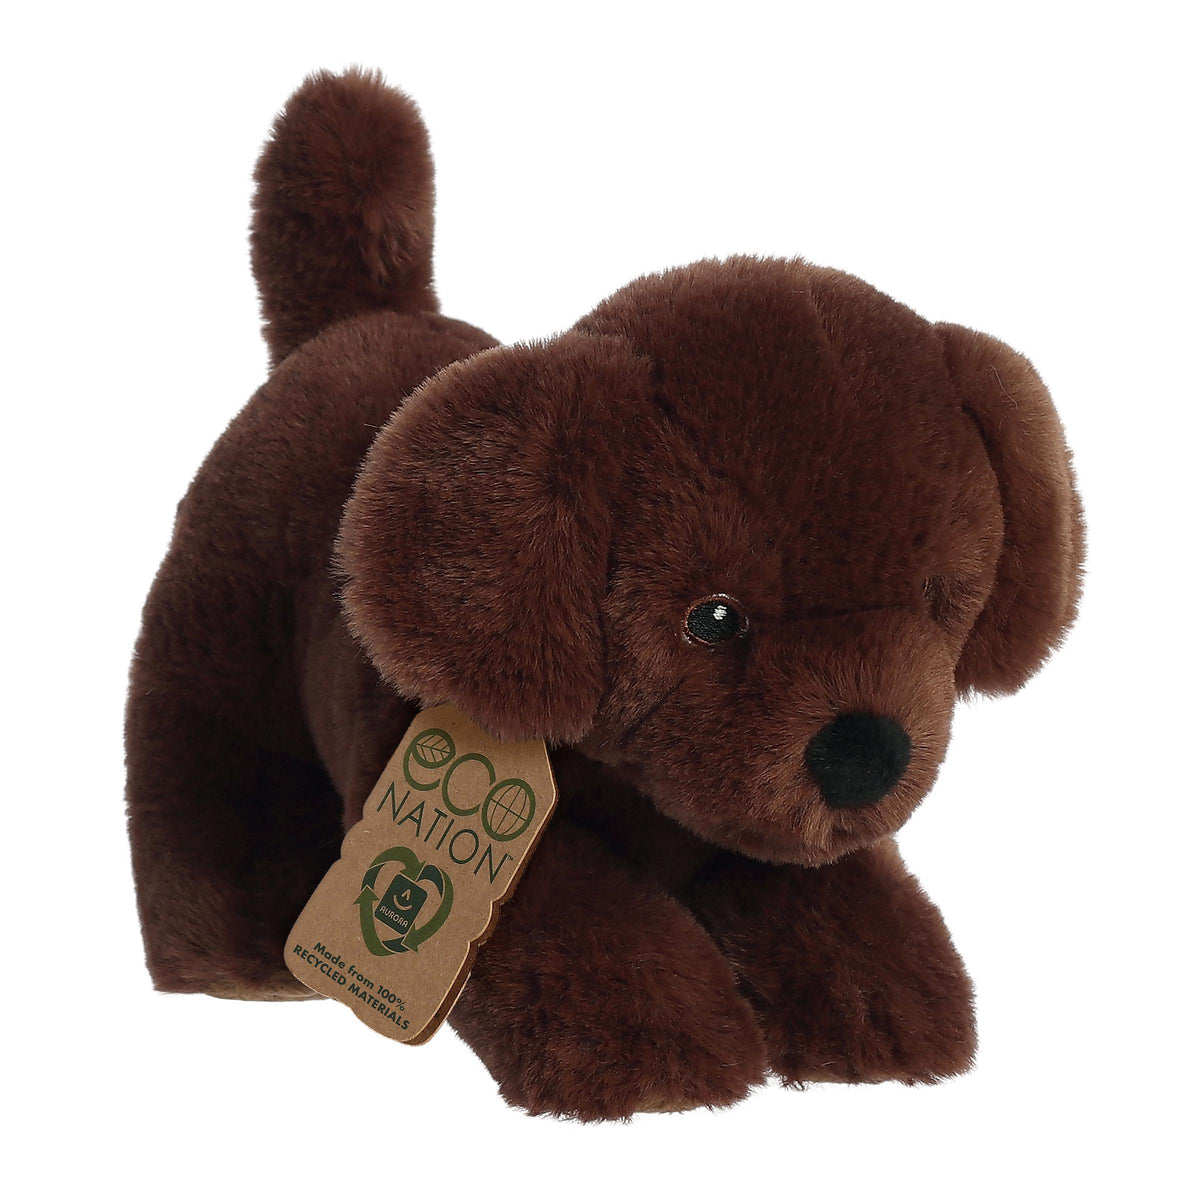 A cute chocolate lab plush with rich brown fur, lovable embroidered eyes, and an eco-nation tag to keep it safe